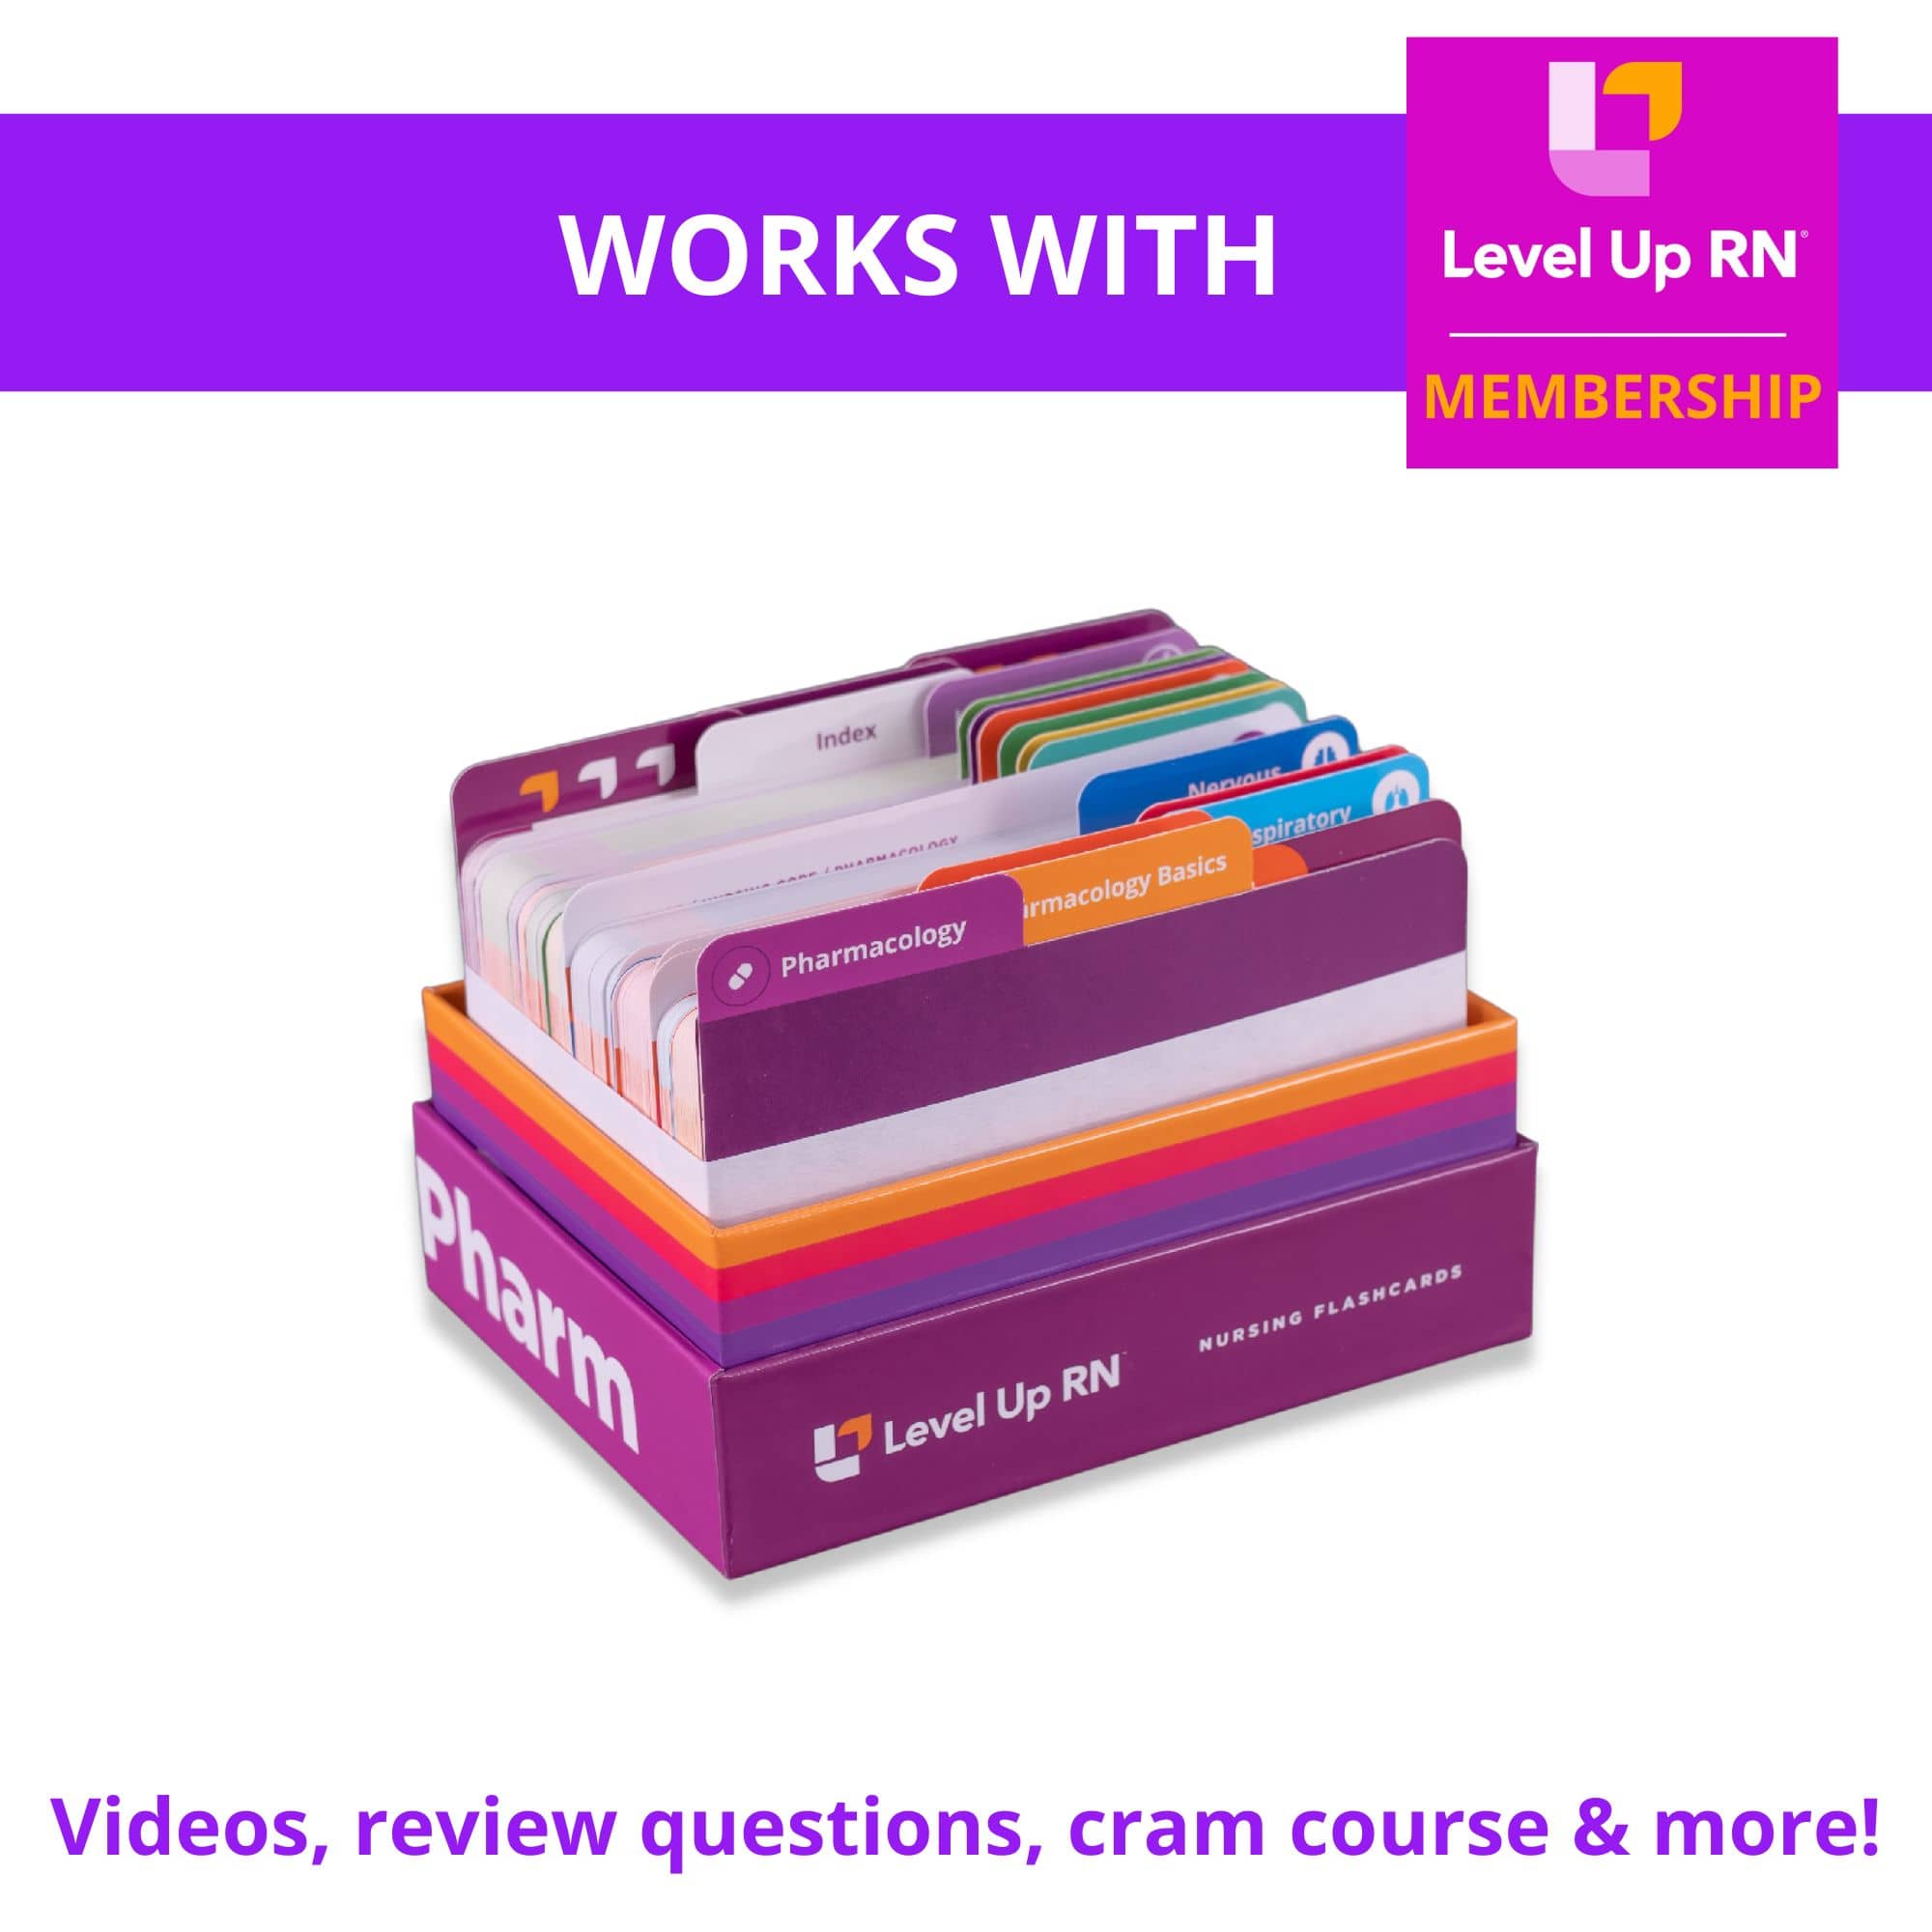 Works with Membership: videos, review questions, cram course & more